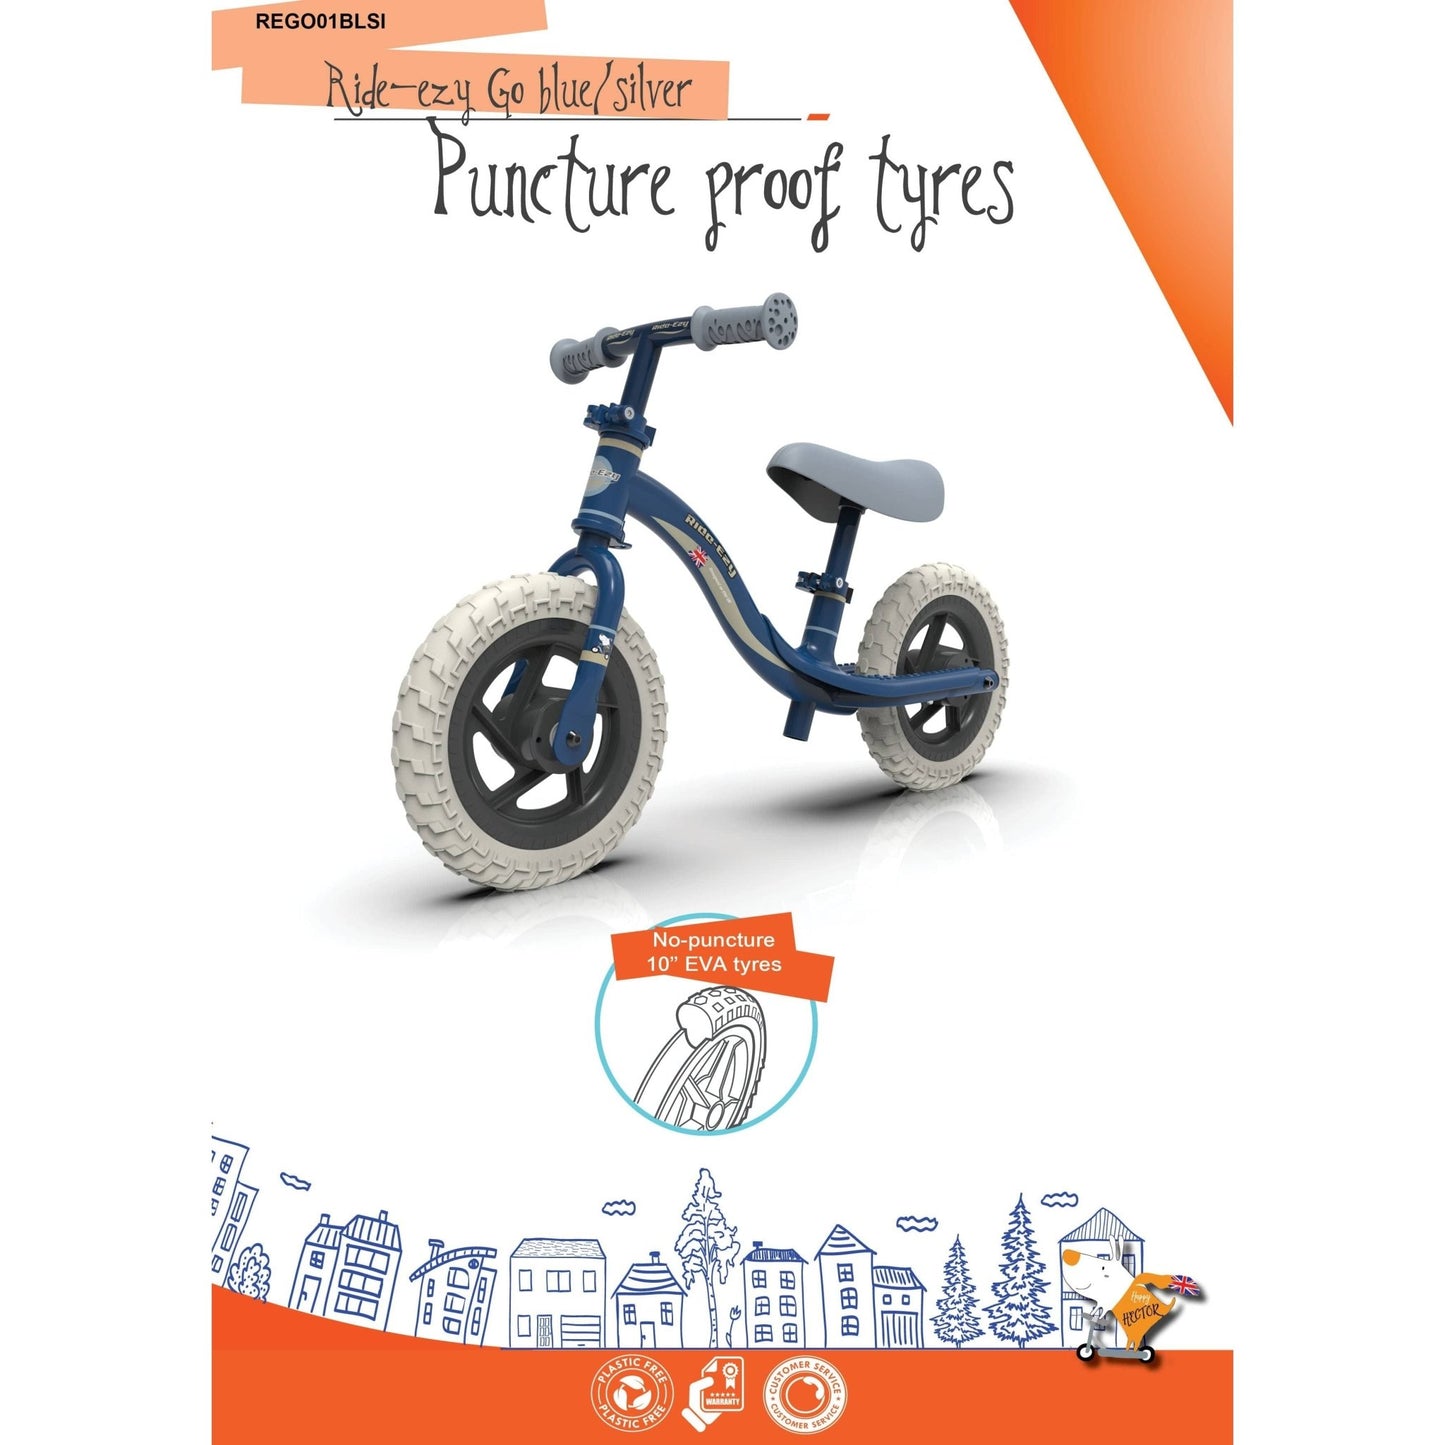 Ride-Ezy Go Balance Bike - Blue & Silver with puncture proof tyres